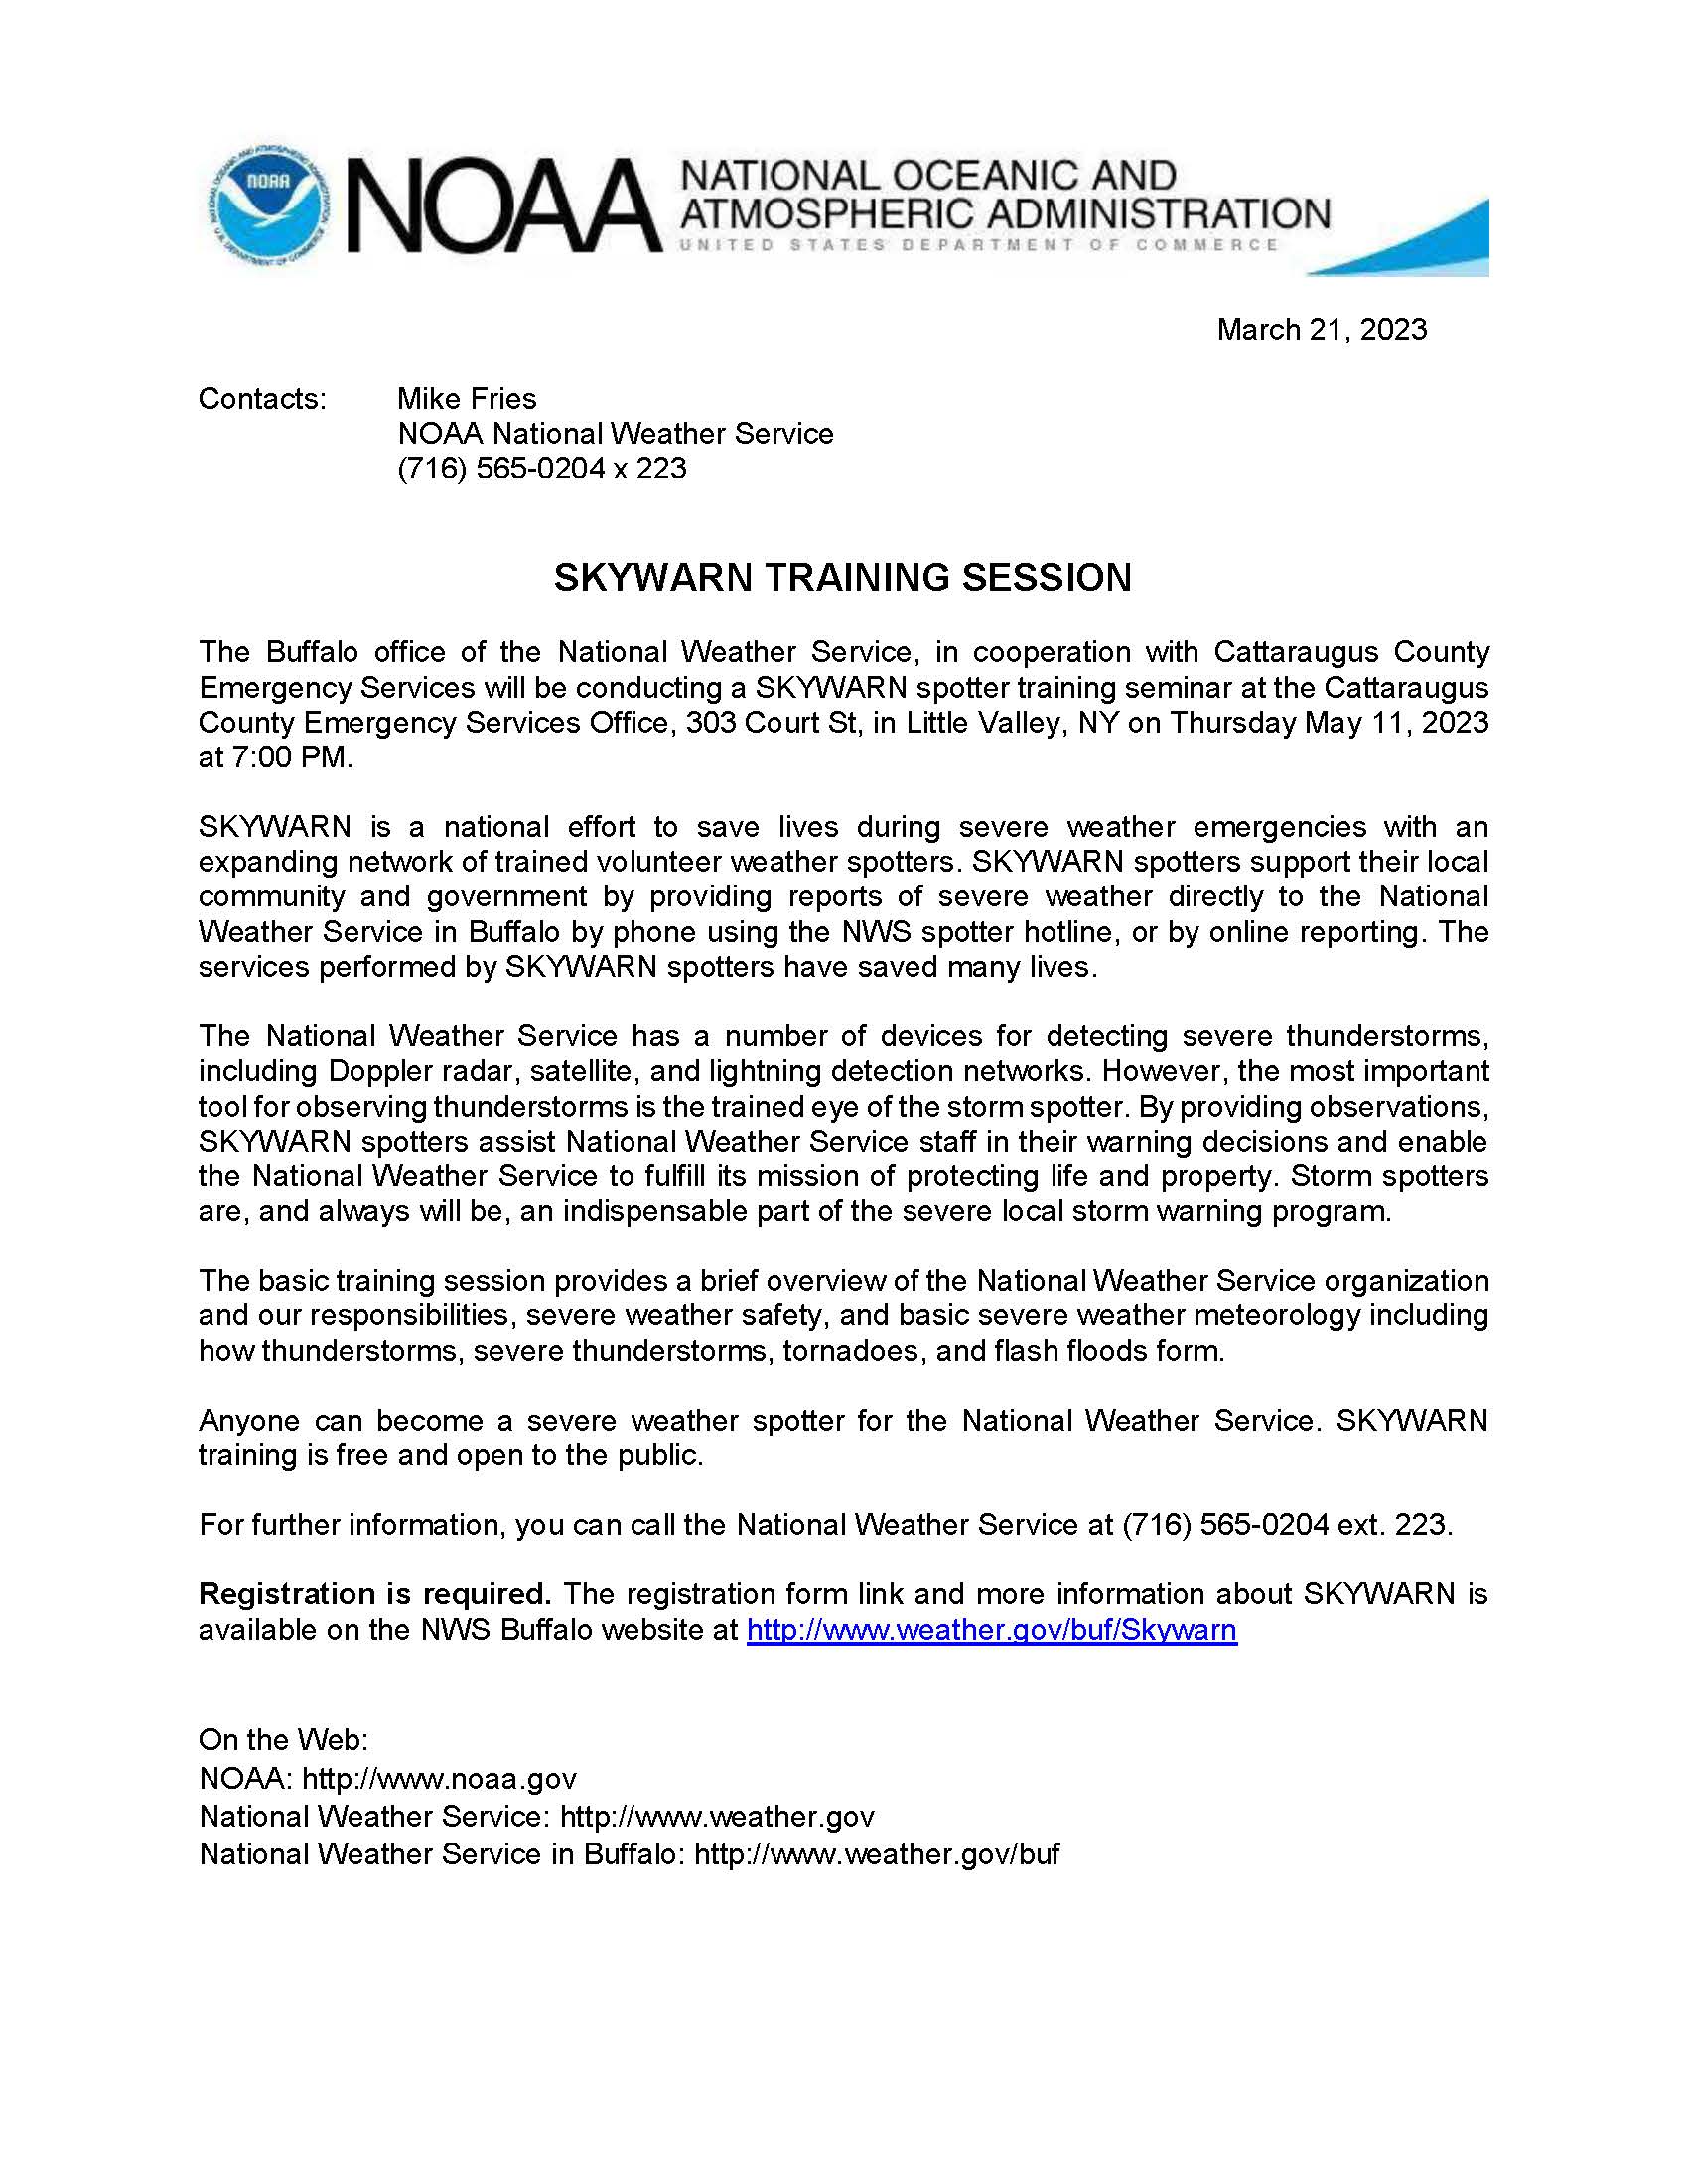 National Weather Service SKYWARN Training Session Press Release